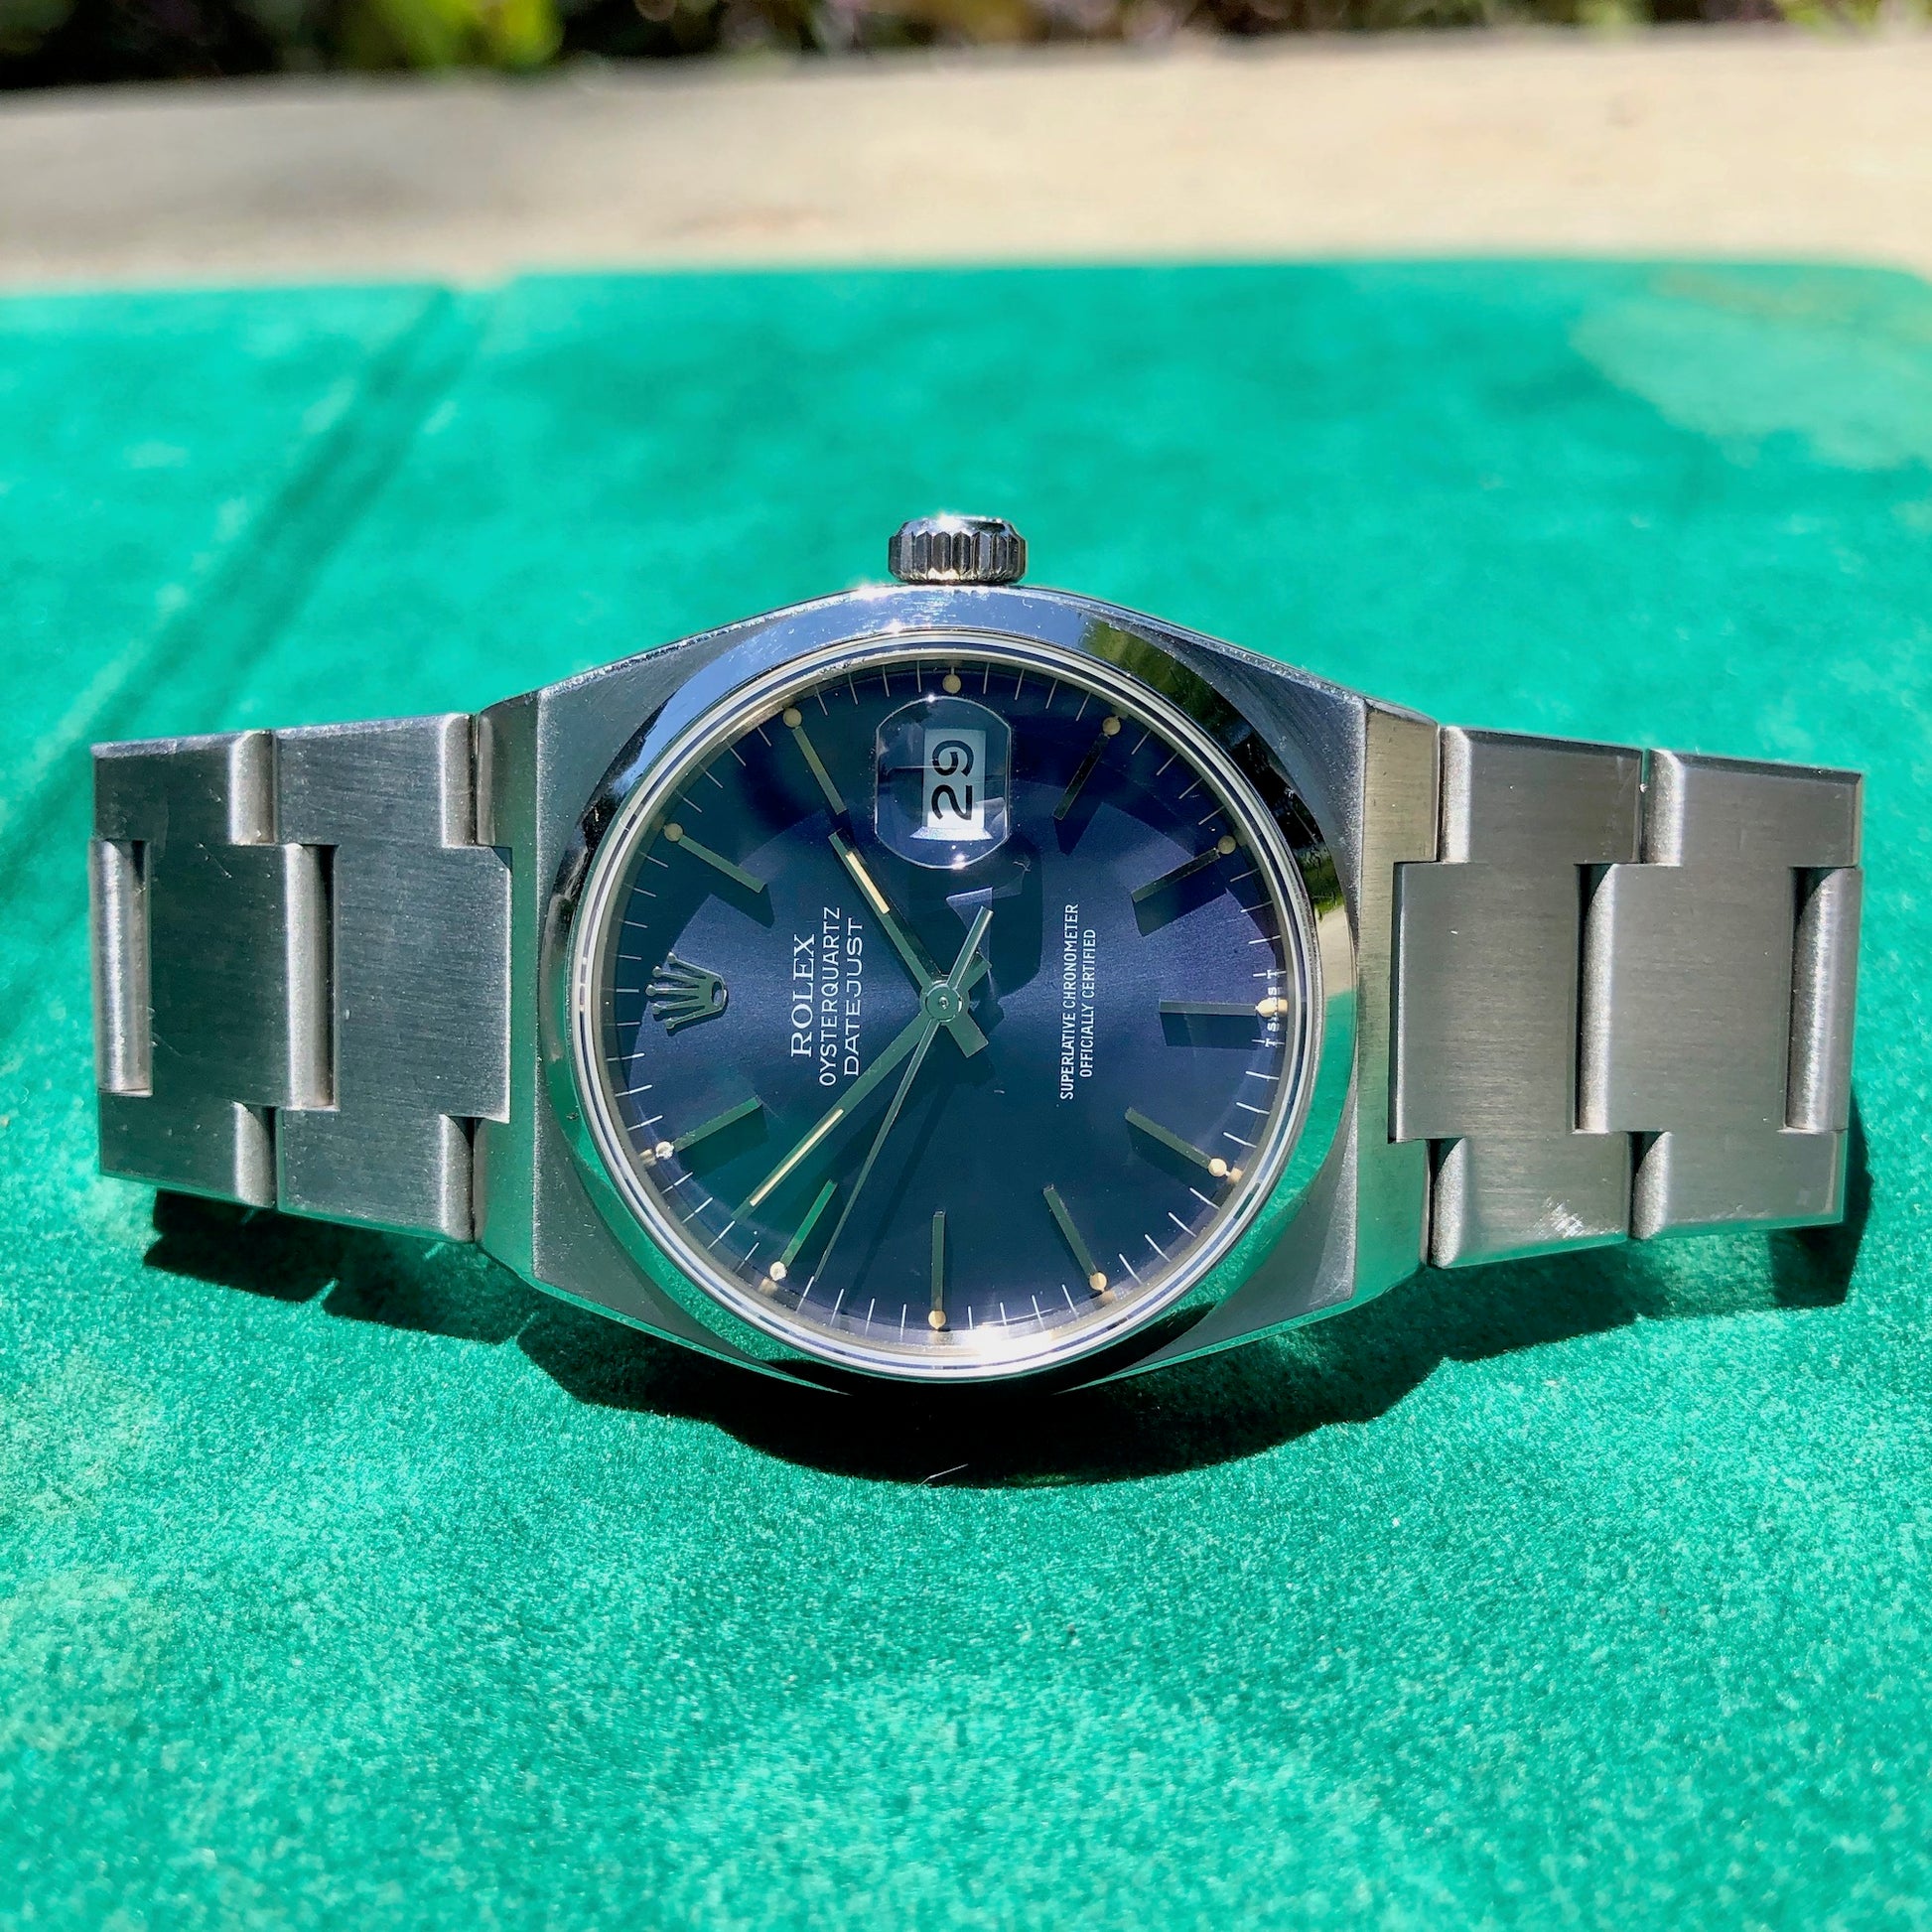 Vintage Rolex Datejust Oysterquartz 17000 Stainless Steel Tropical Wristwatch Circa 1982 - Hashtag Watch Company